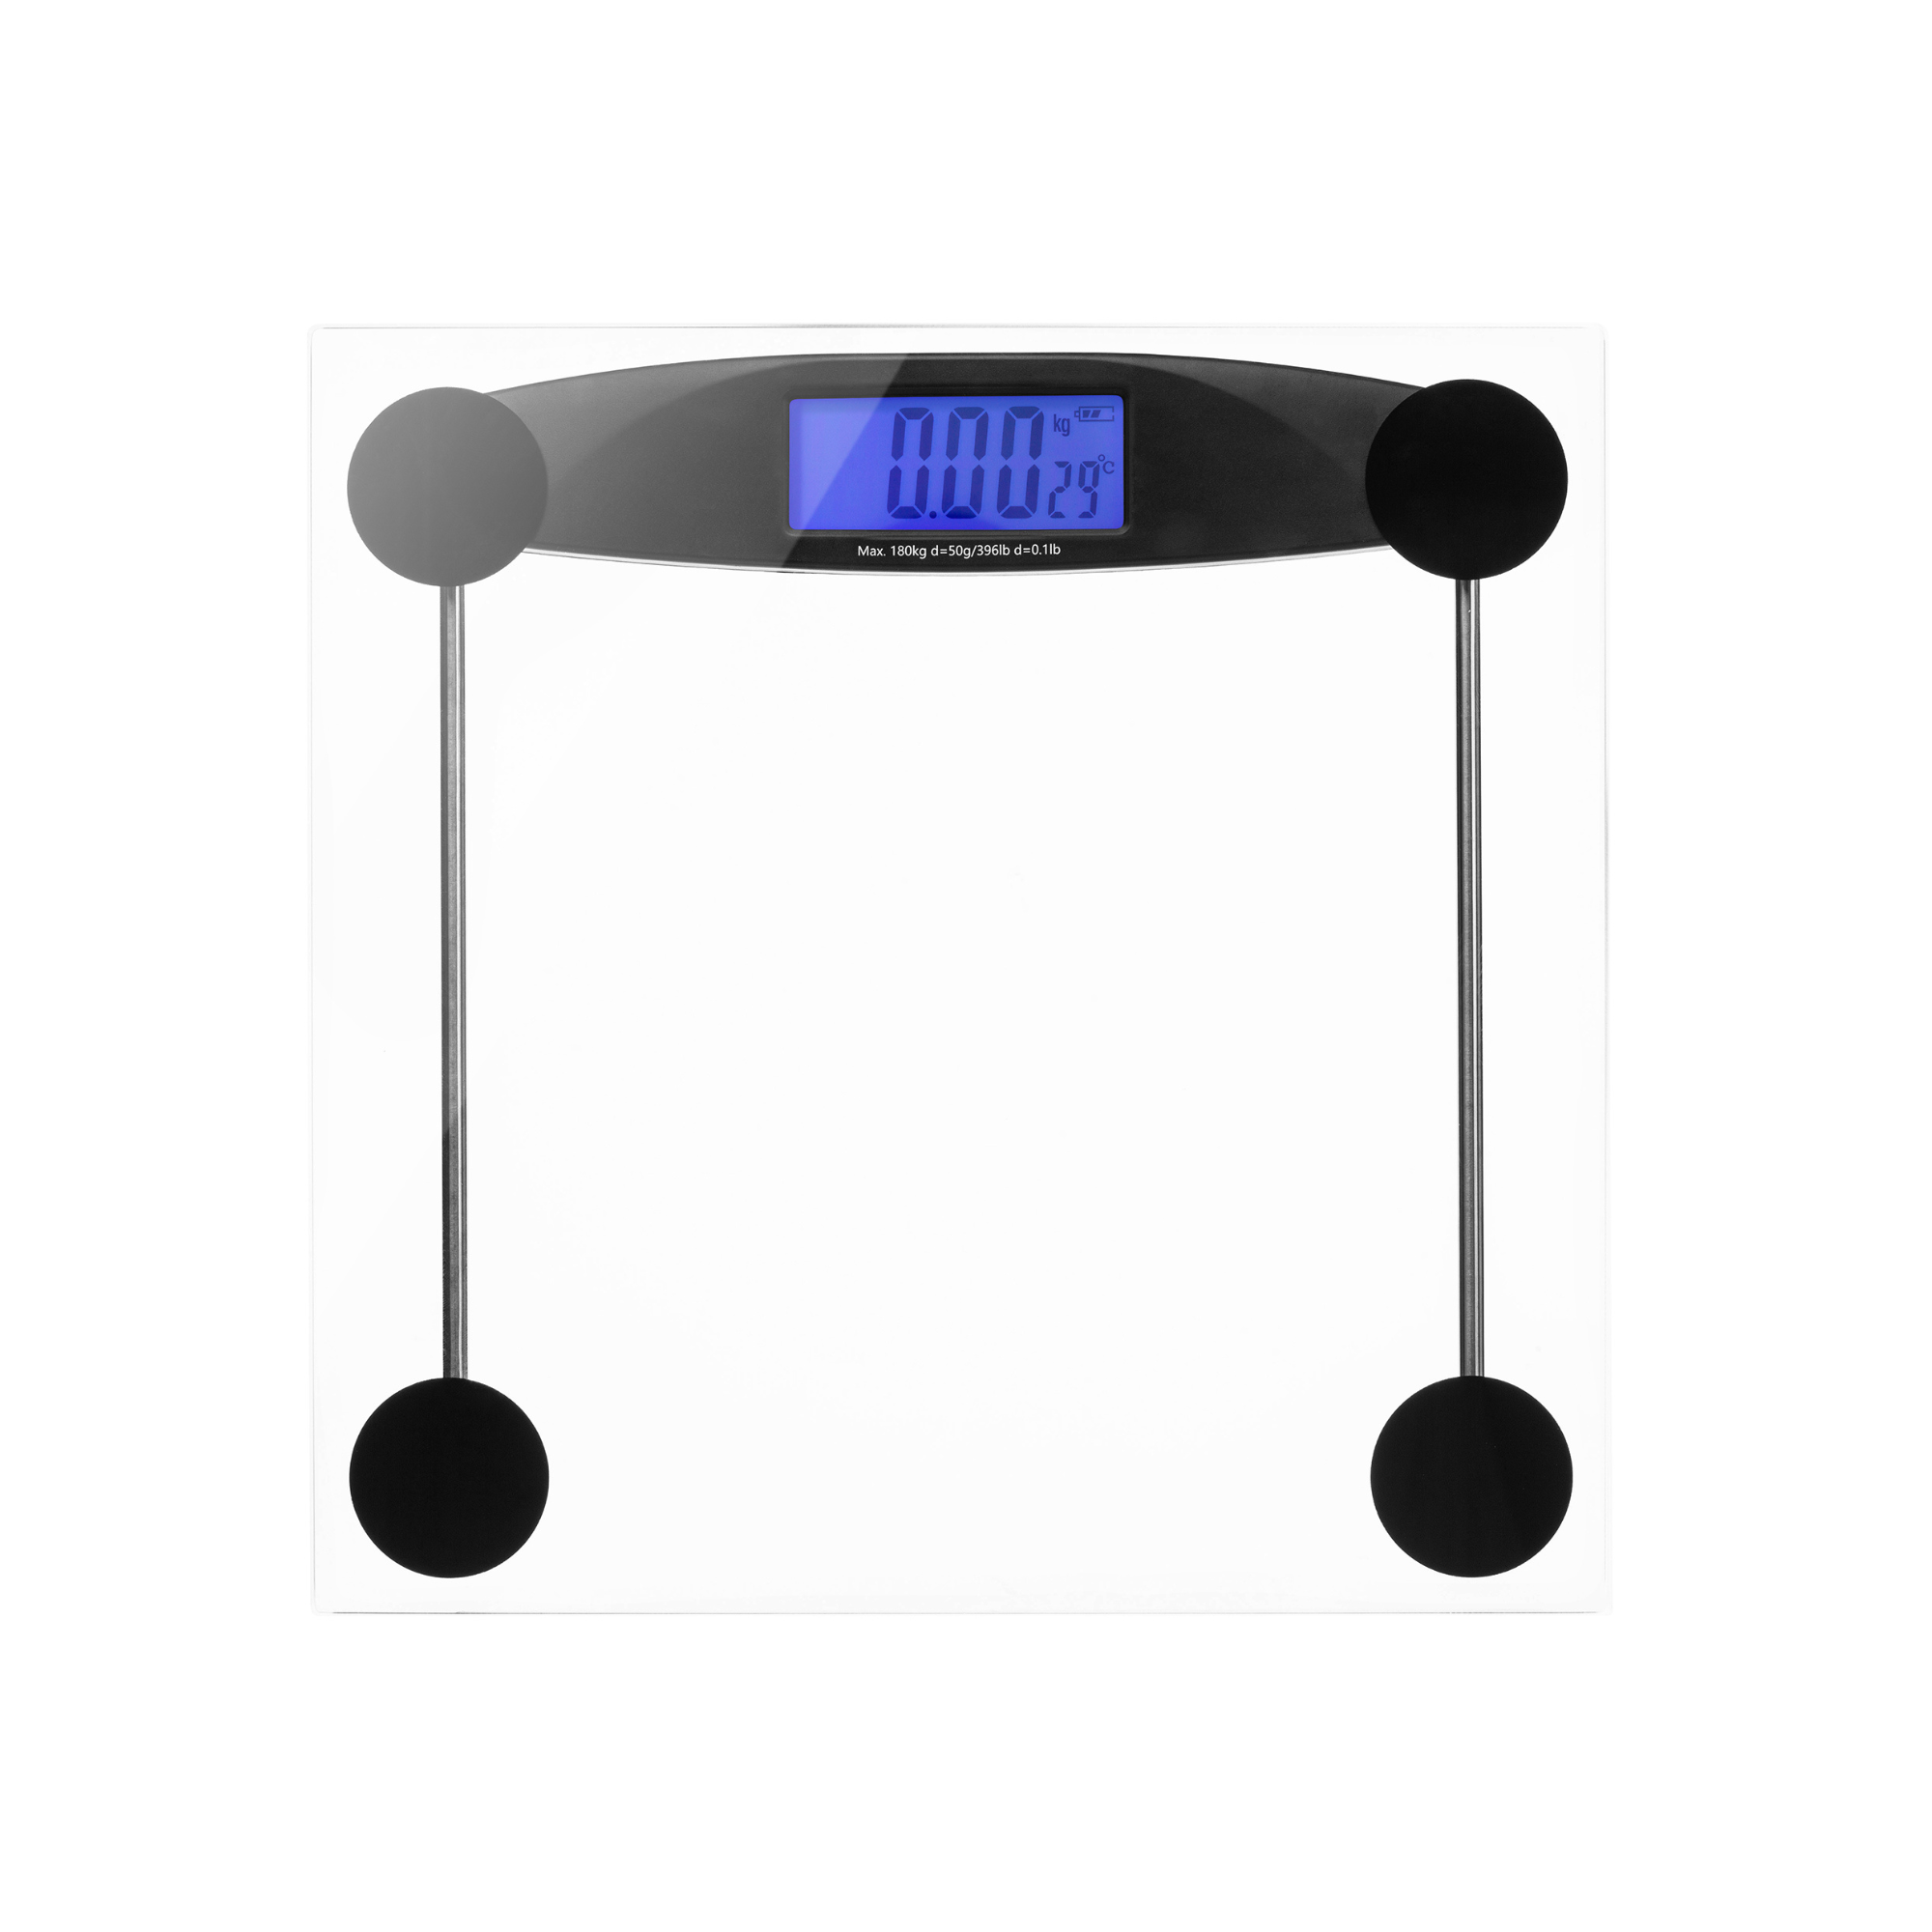 Poplar Home Products Digital Bathroom Scales for Accurate Body Weight – Ultra Thin, Bamboo Scale – Auto Step on Design – 4 Precision Weight Sensors